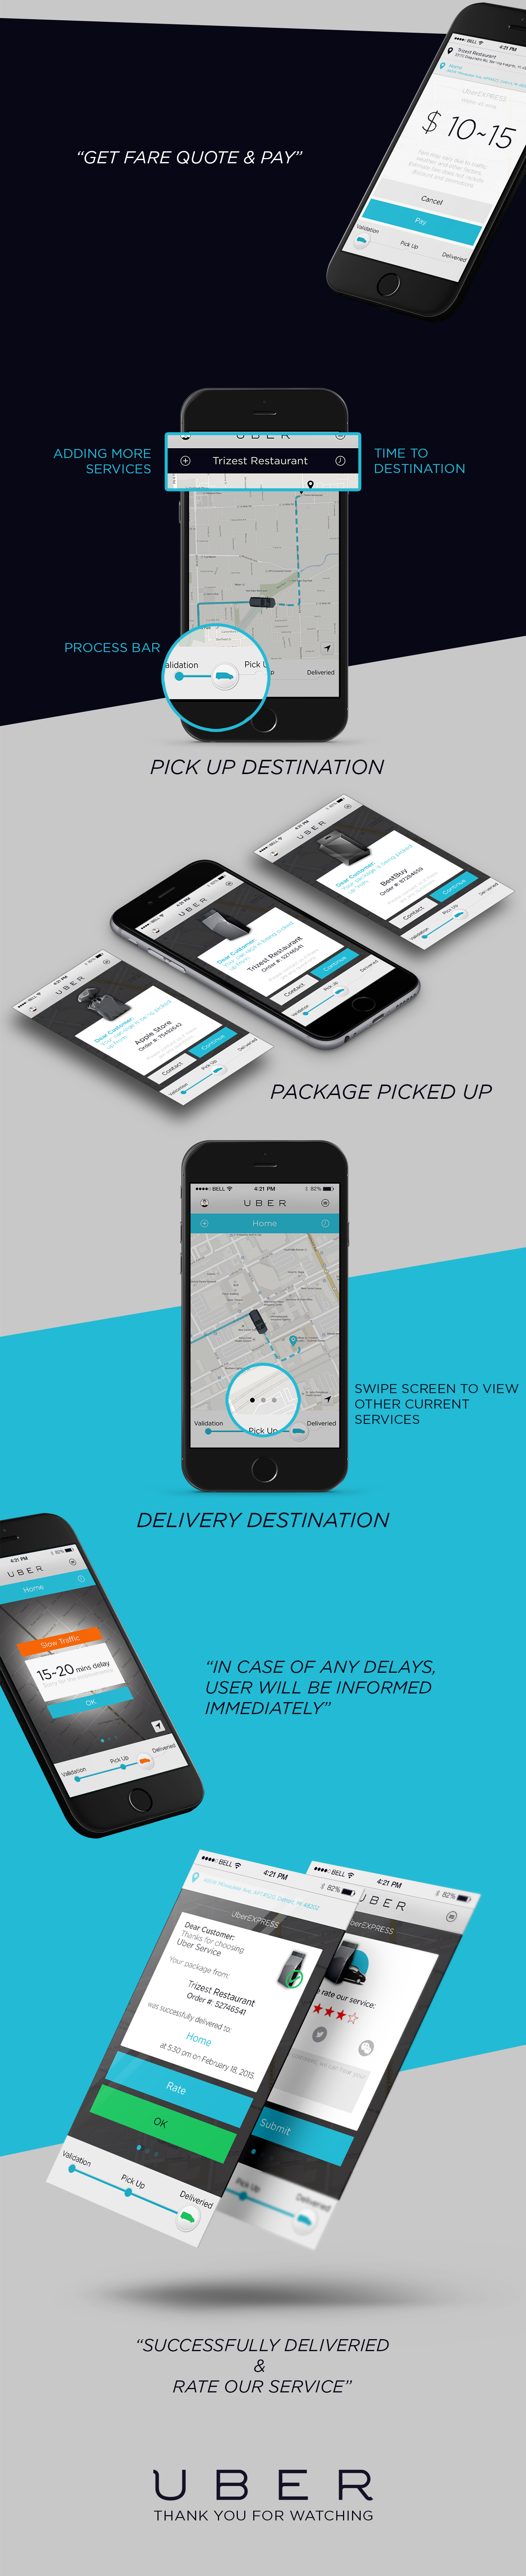 UI ux app delivery brand Uber Interface interaction